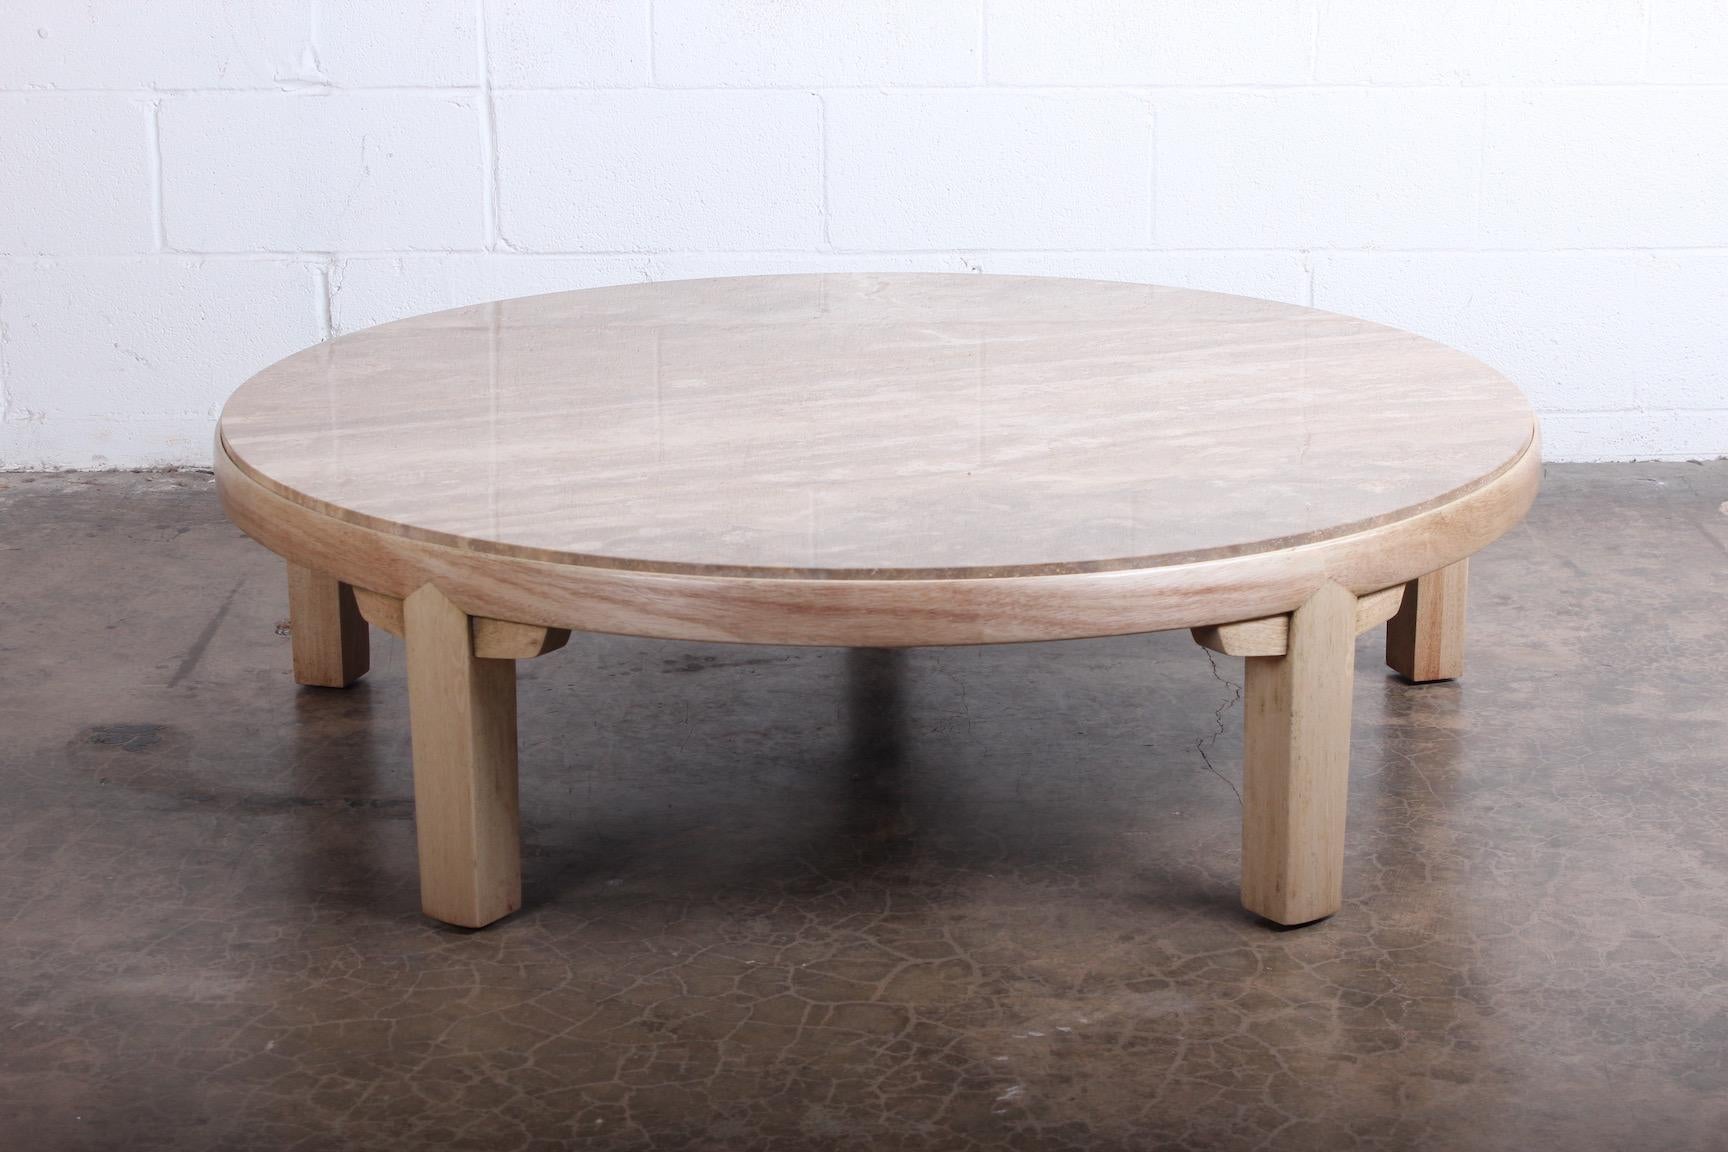 A bleached mahogany coffee table with inset travertine top. Designed by Edward Wormley for Dunbar.